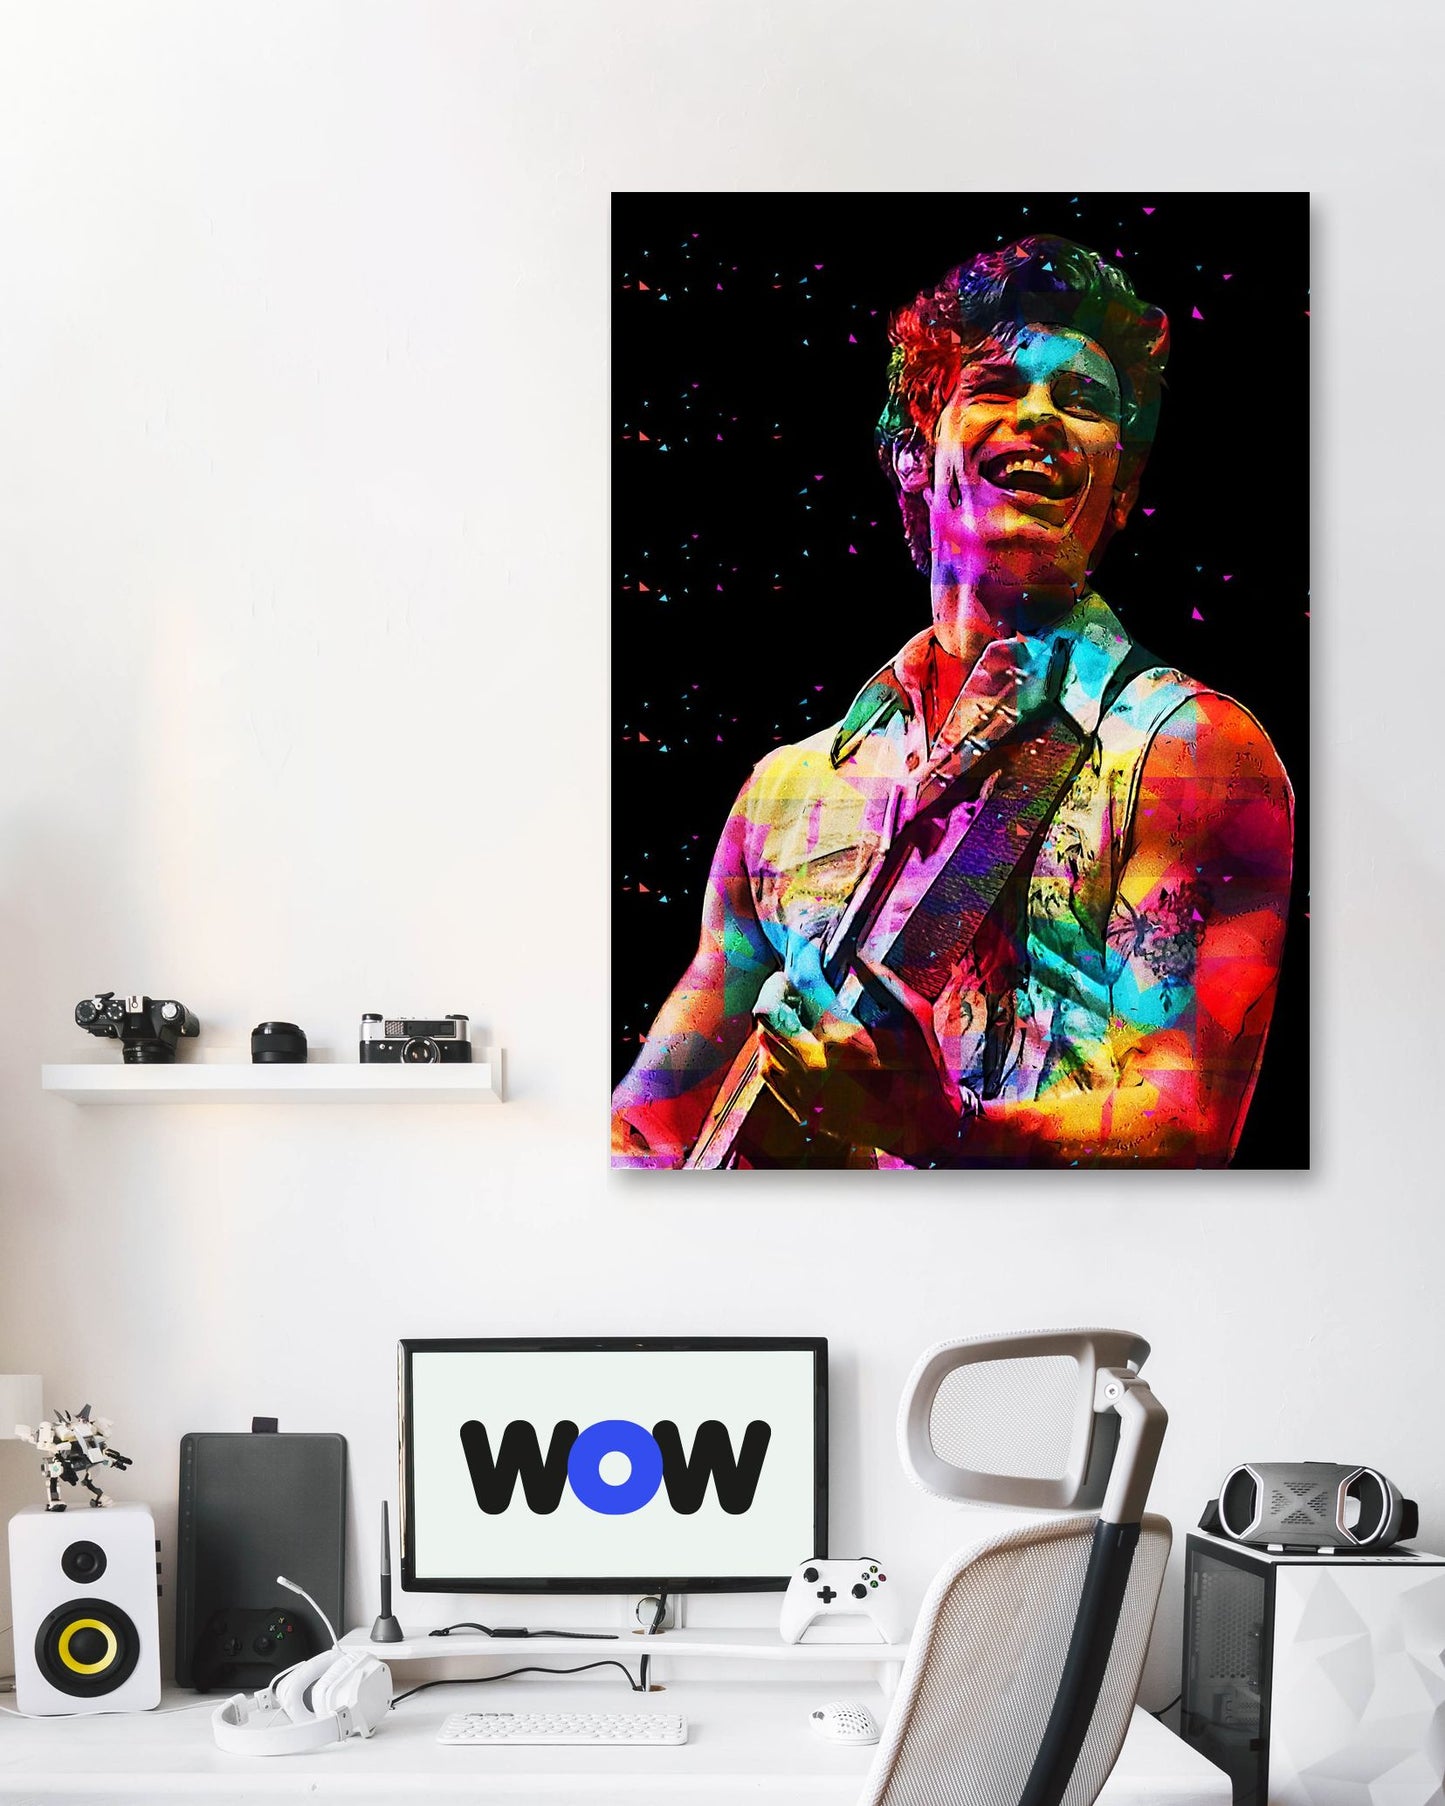 Shawn Mendes music - @ColorfulArt